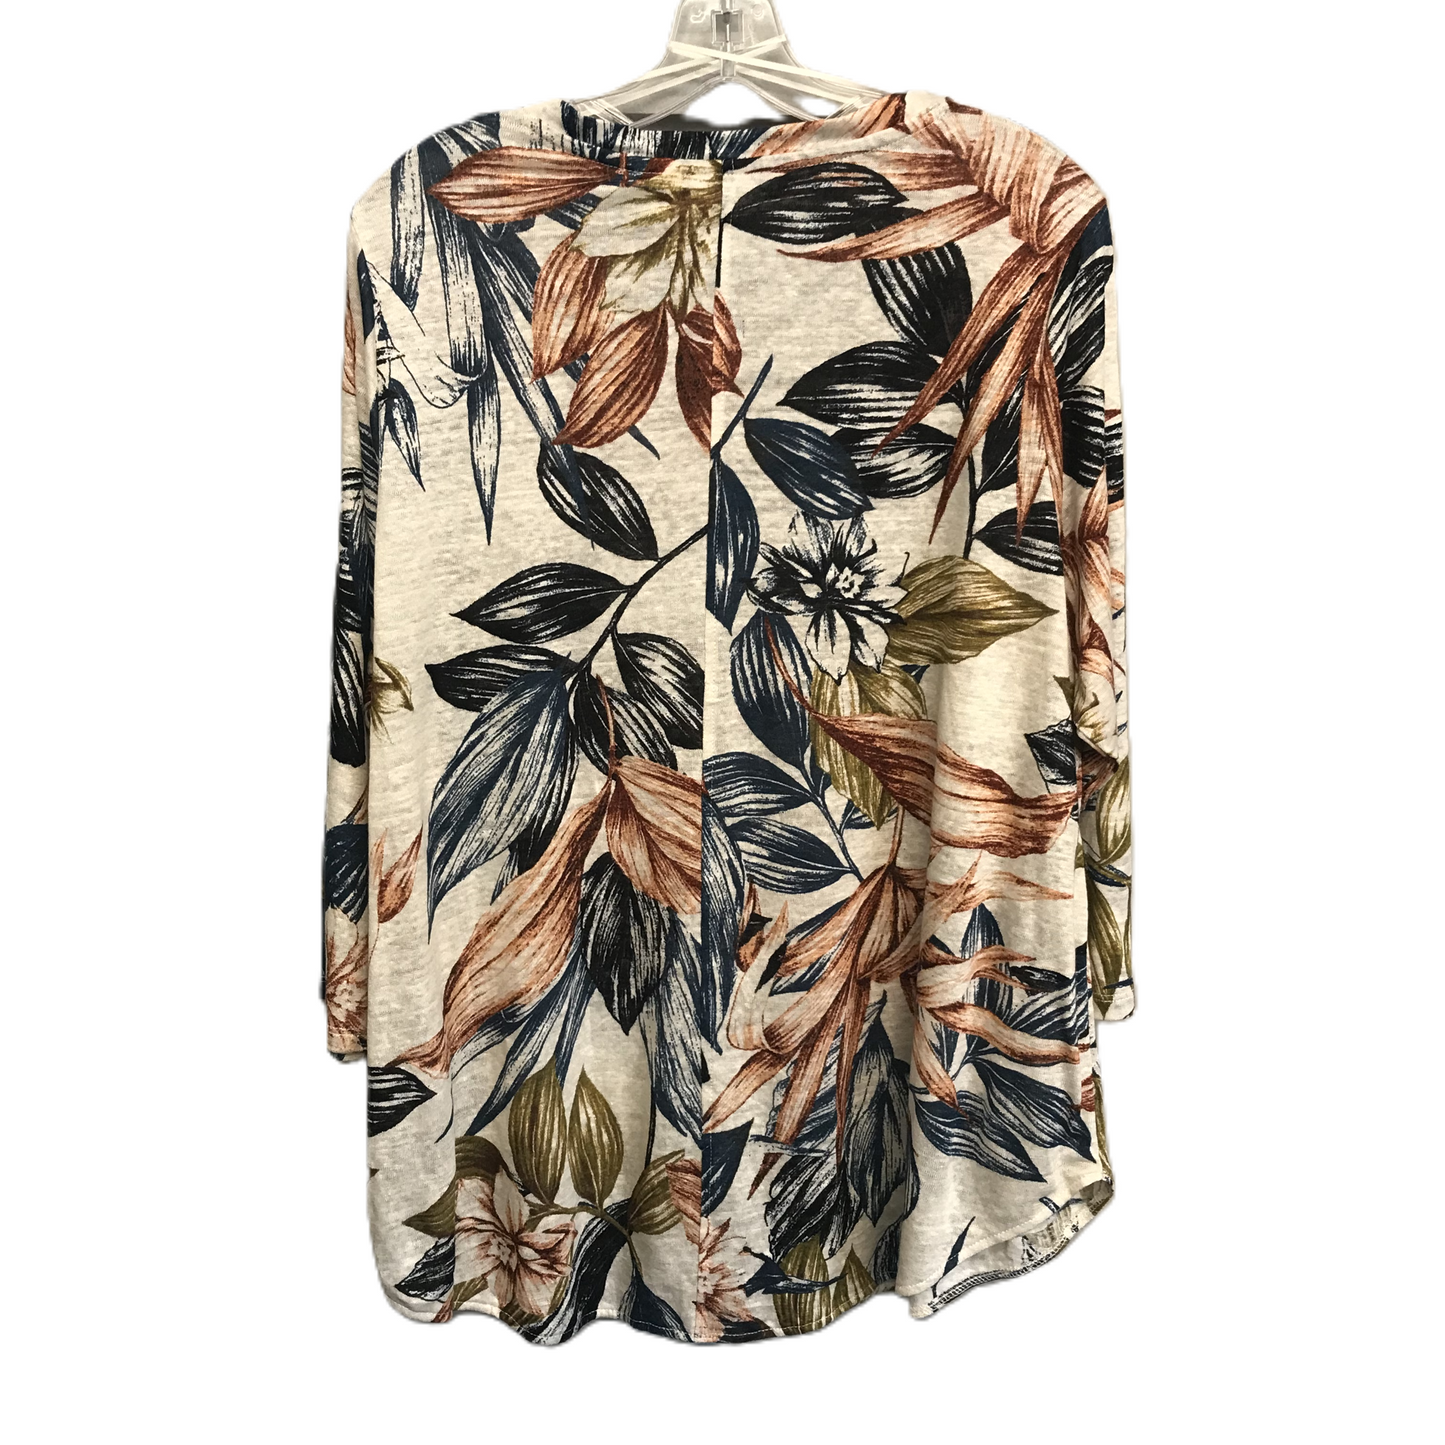 Floral Print Top Long Sleeve By C And C, Size: 1x